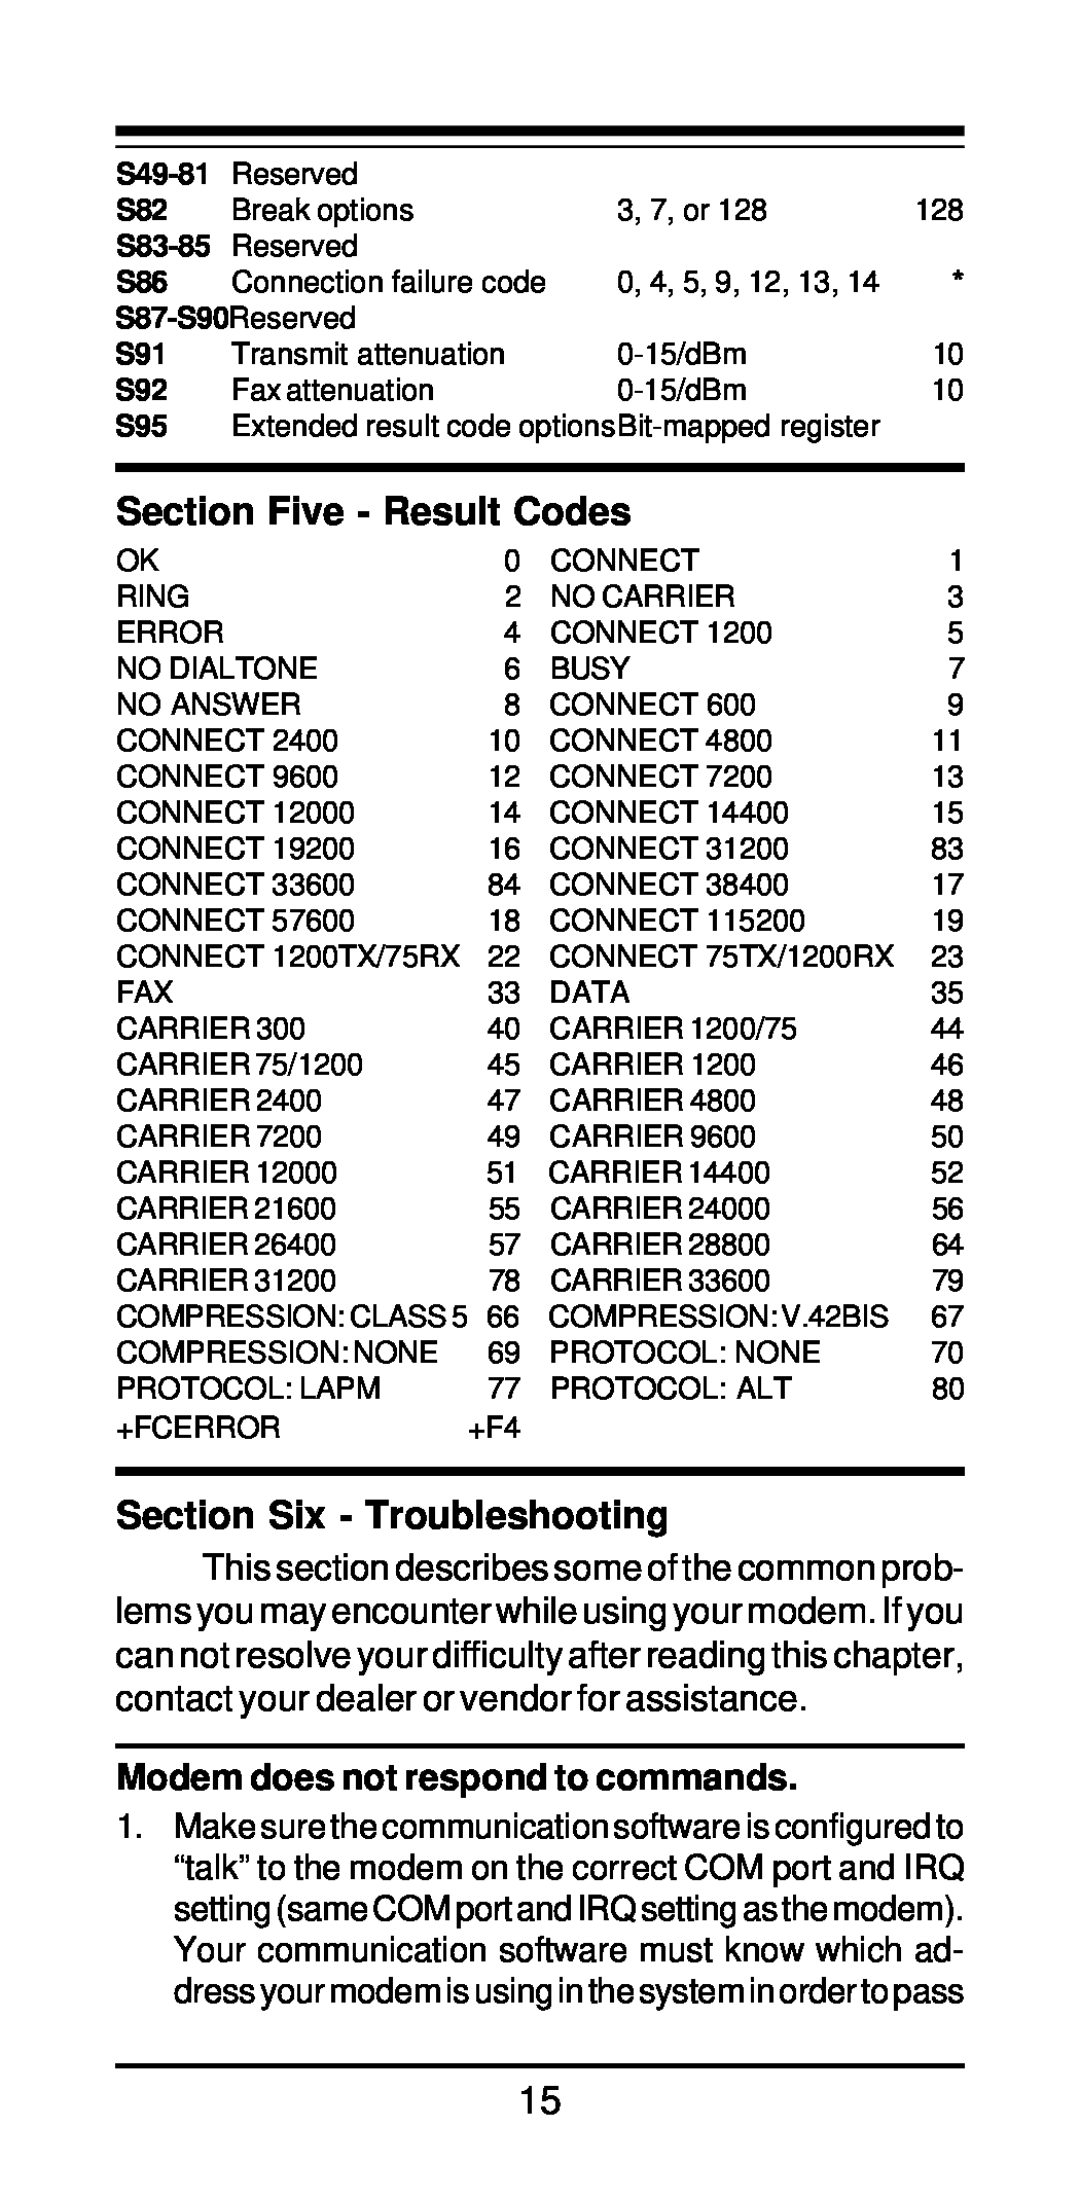 MaxTech xpvs336i user manual Section Five - Result Codes, Section Six - Troubleshooting, Modem does not respond to commands 